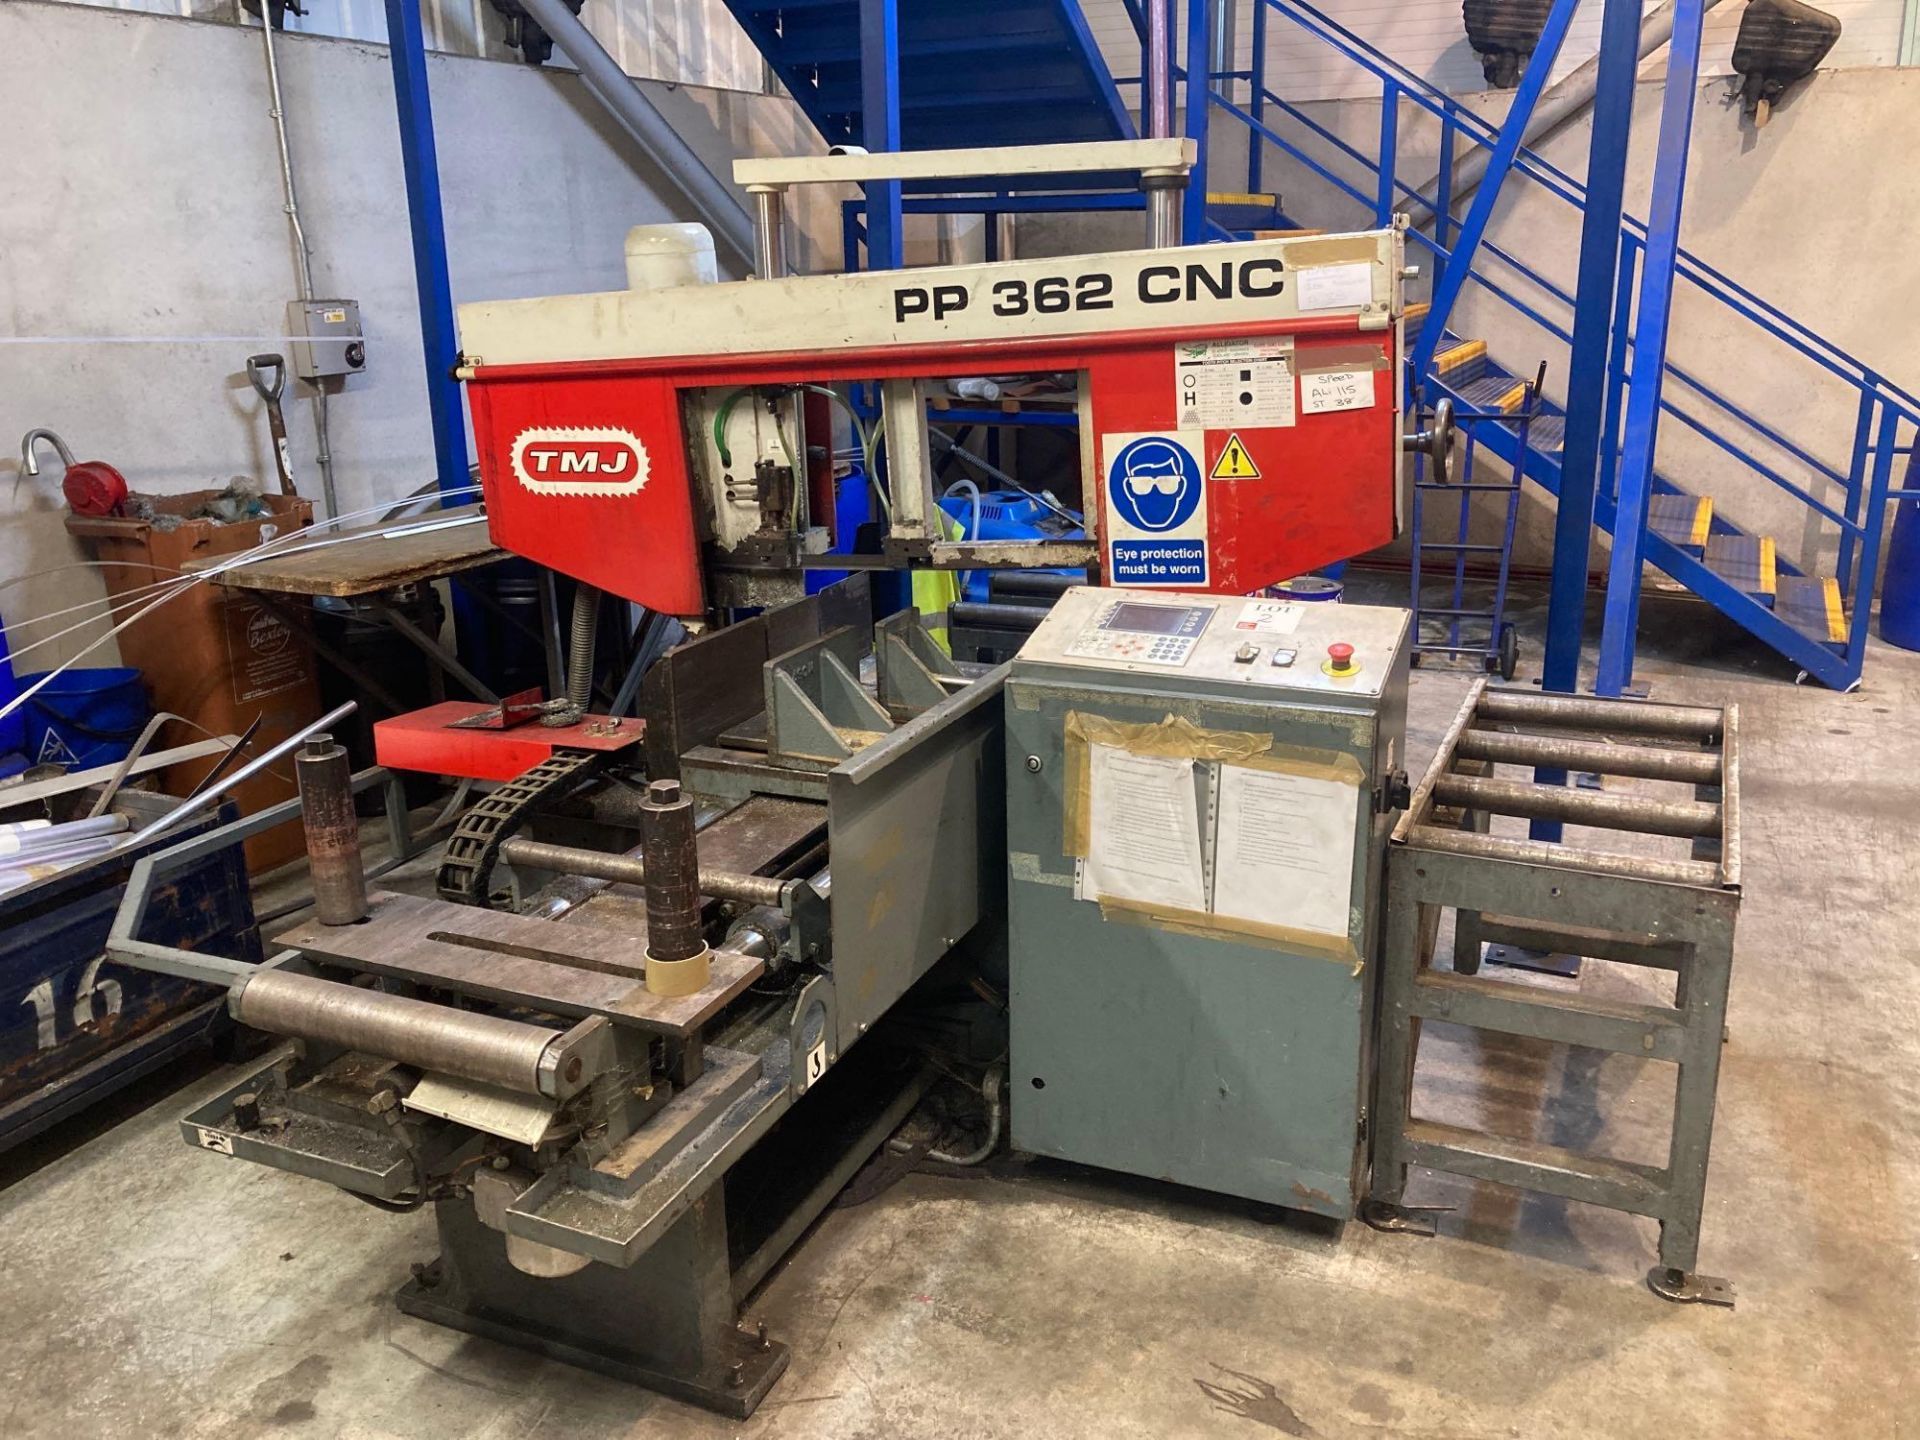 TMJ PP362 CNC double column band saw, (please note three phase, electrical disconnection will be - Image 4 of 8